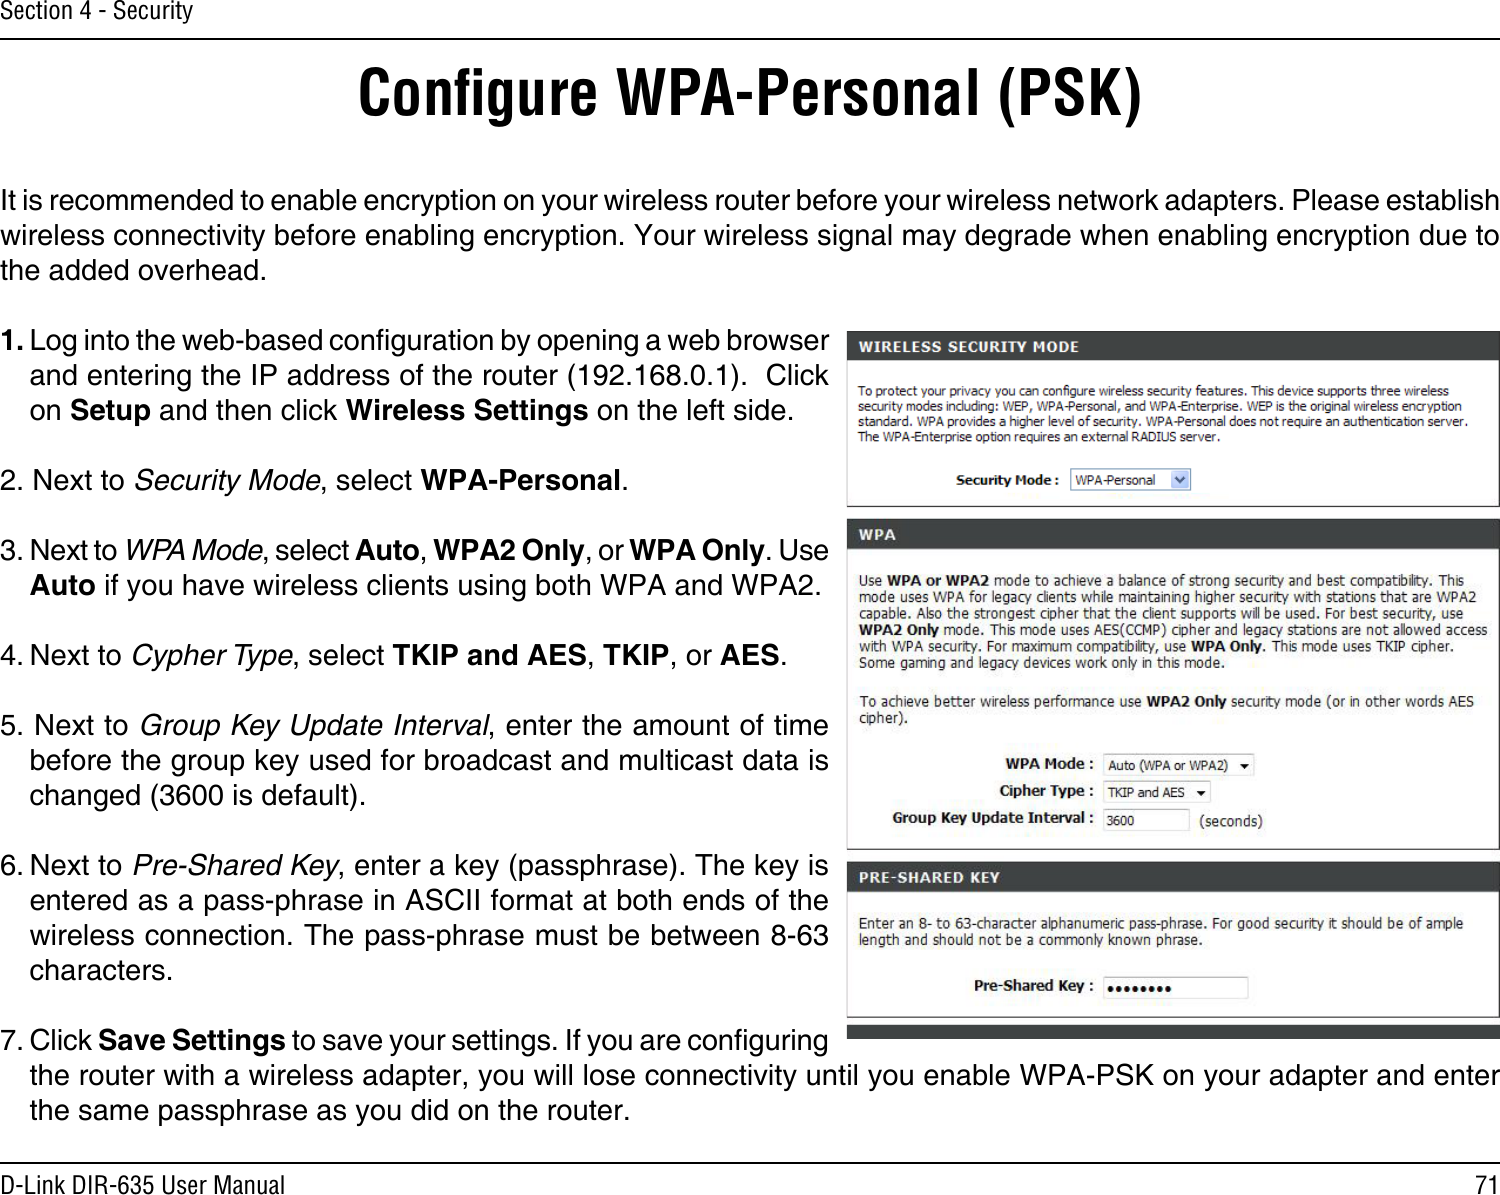 71D-Link DIR-635 User ManualSection 4 - SecurityConﬁgure WPA-Personal (PSK)It is recommended to enable encryption on your wireless router before your wireless network adapters. Please establish wireless connectivity before enabling encryption. Your wireless signal may degrade when enabling encryption due to the added overhead.1. Log into the web-based conguration by opening a web browser and entering the IP address of the router (192.168.0.1).  Click on Setup and then click Wireless Settings on the left side.2. Next to Security Mode, select WPA-Personal.3. Next to WPA Mode, select Auto, WPA2 Only, or WPA Only. Use Auto if you have wireless clients using both WPA and WPA2.4. Next to Cypher Type, select TKIP and AES, TKIP, or AES.5. Next to Group Key Update Interval, enter the amount of time before the group key used for broadcast and multicast data is changed (3600 is default).6. Next to Pre-Shared Key, enter a key (passphrase). The key is entered as a pass-phrase in ASCII format at both ends of the wireless connection. The pass-phrase must be between 8-63 characters. 7. Click Save Settings to save your settings. If you are conguring the router with a wireless adapter, you will lose connectivity until you enable WPA-PSK on your adapter and enter the same passphrase as you did on the router.